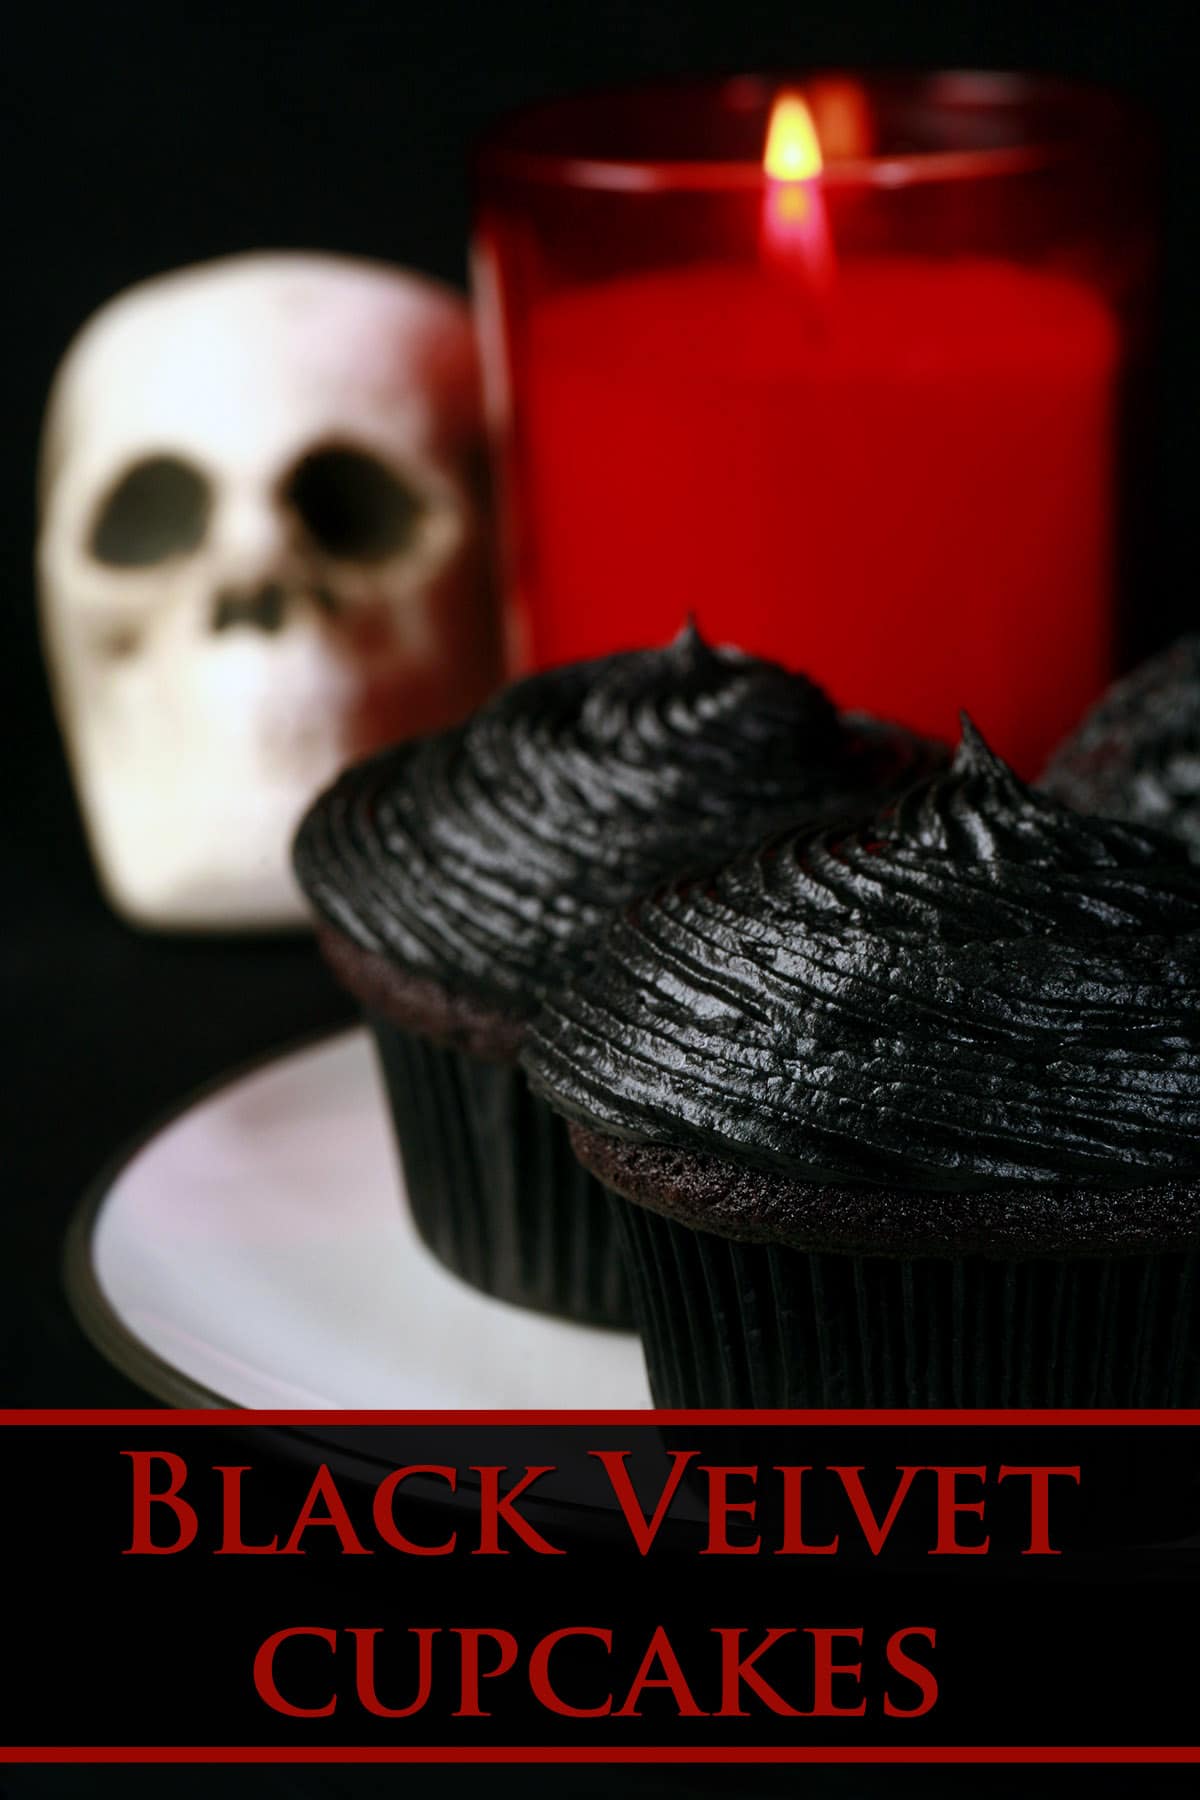 2 black velvet cupcakes on a white plate, with a skull and red candle in the background.